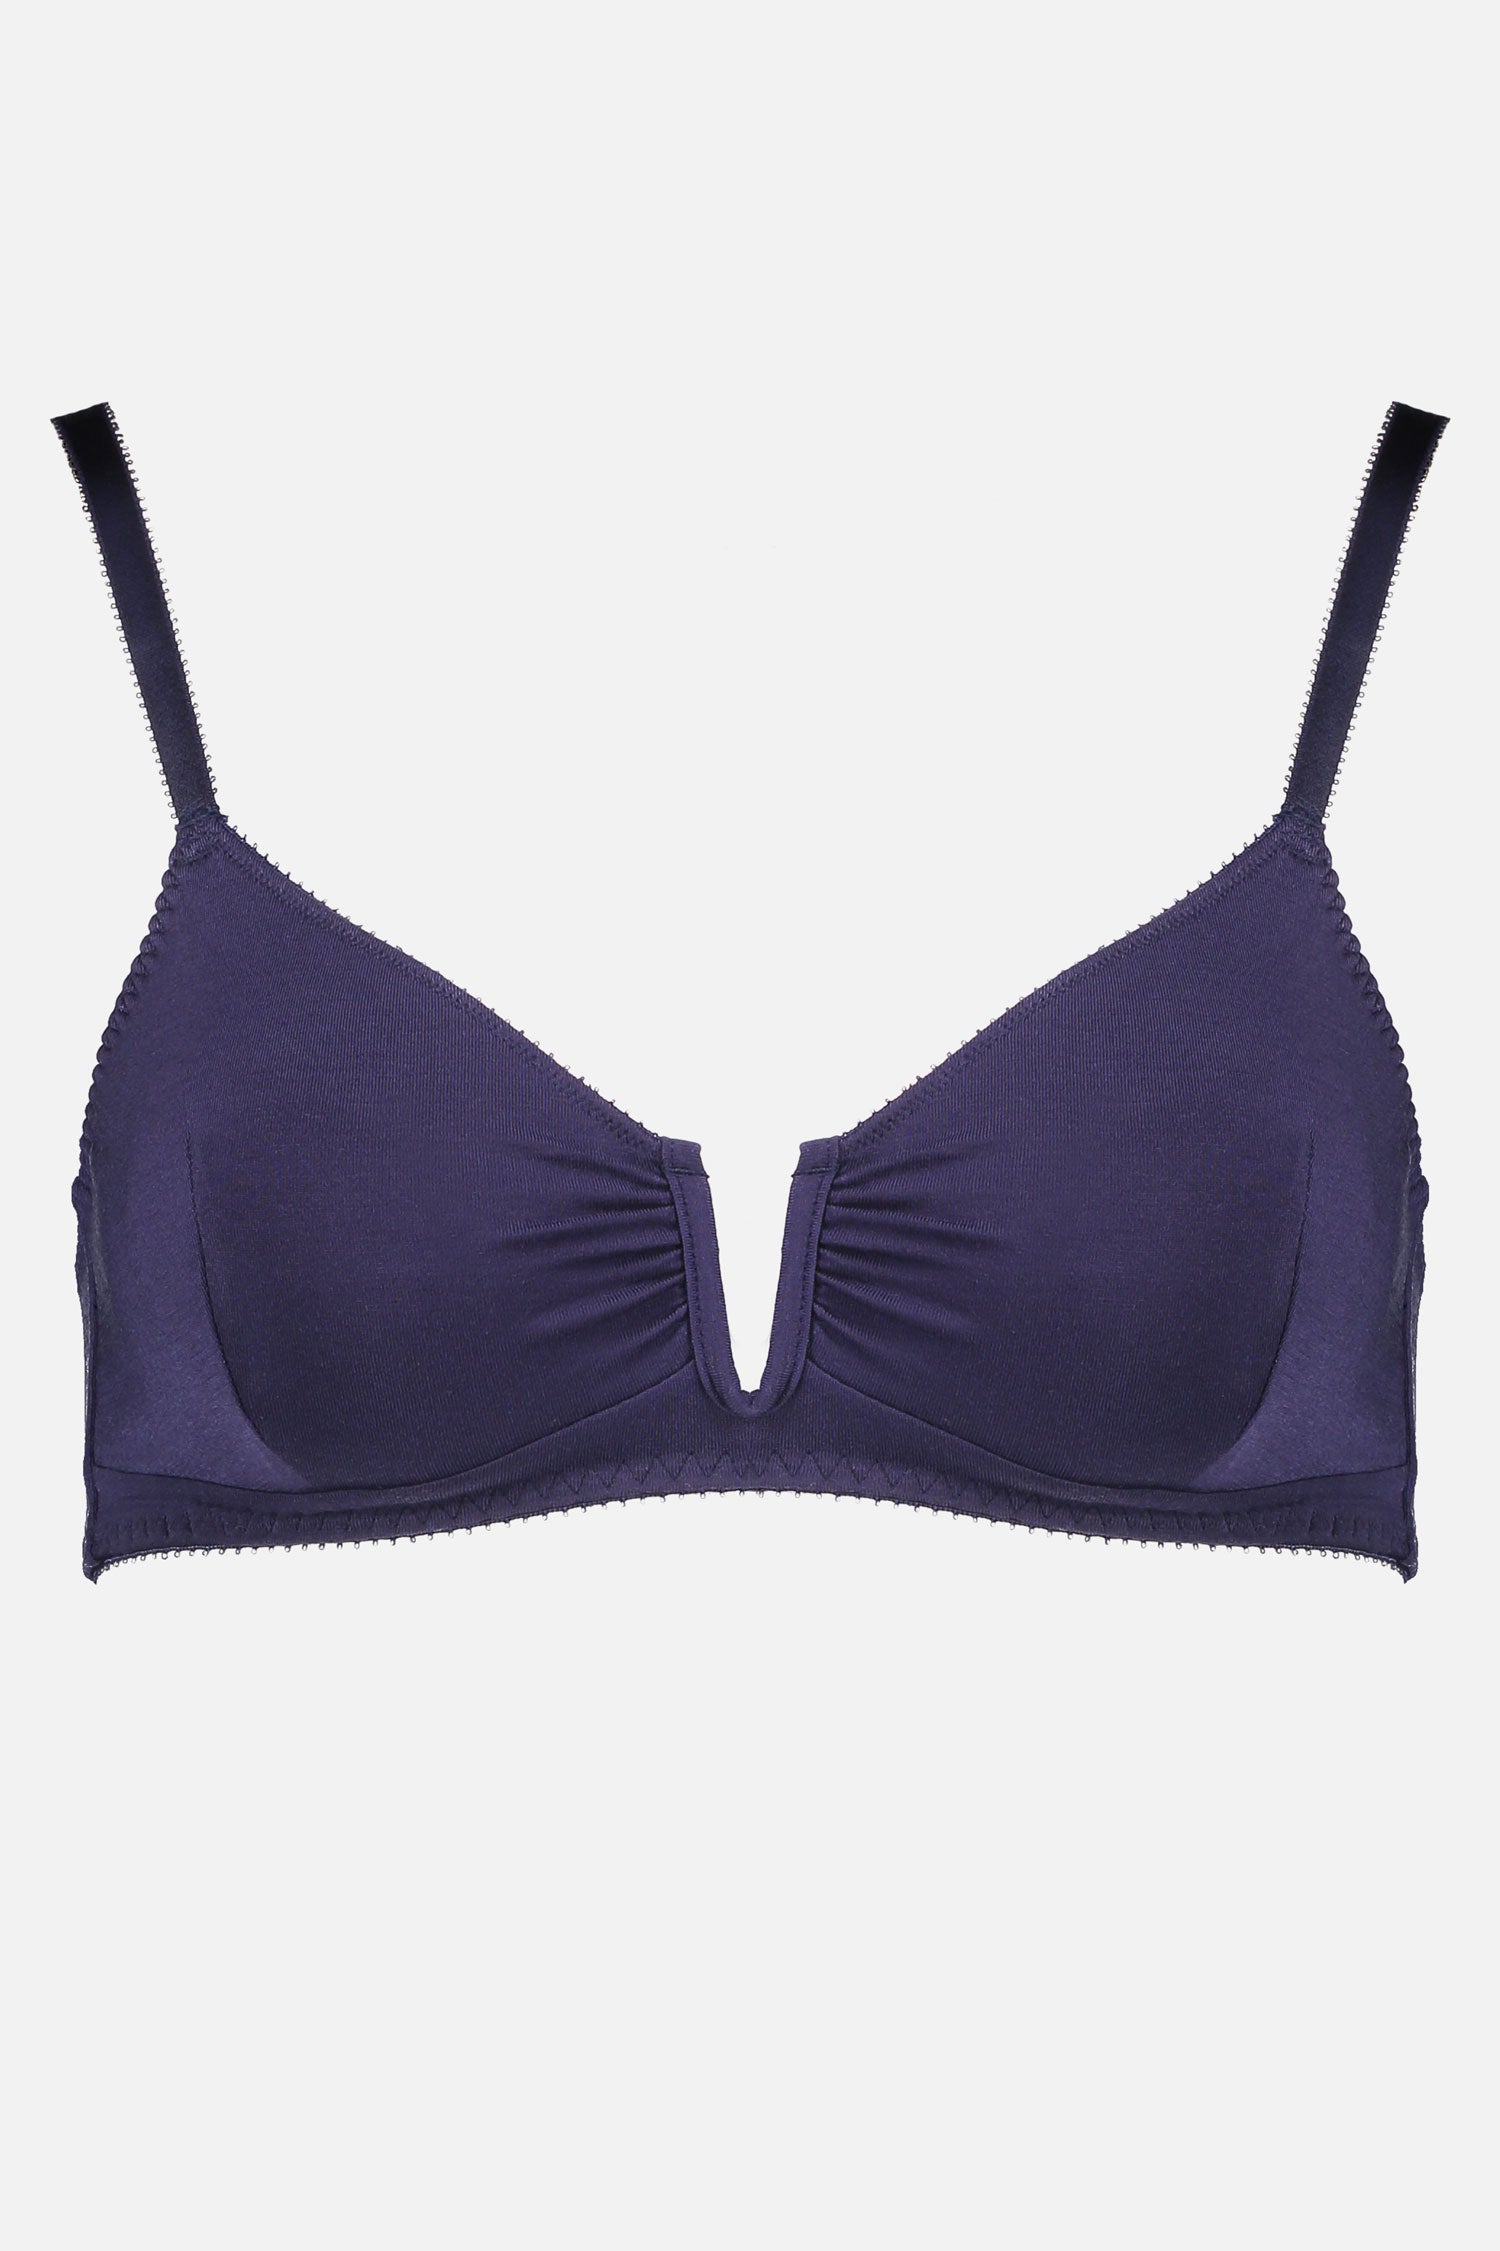 Videris Lingerie Angela underwire free soft cup bra in navy TENCEL™ features a triangle shaped cup and U wire in the front